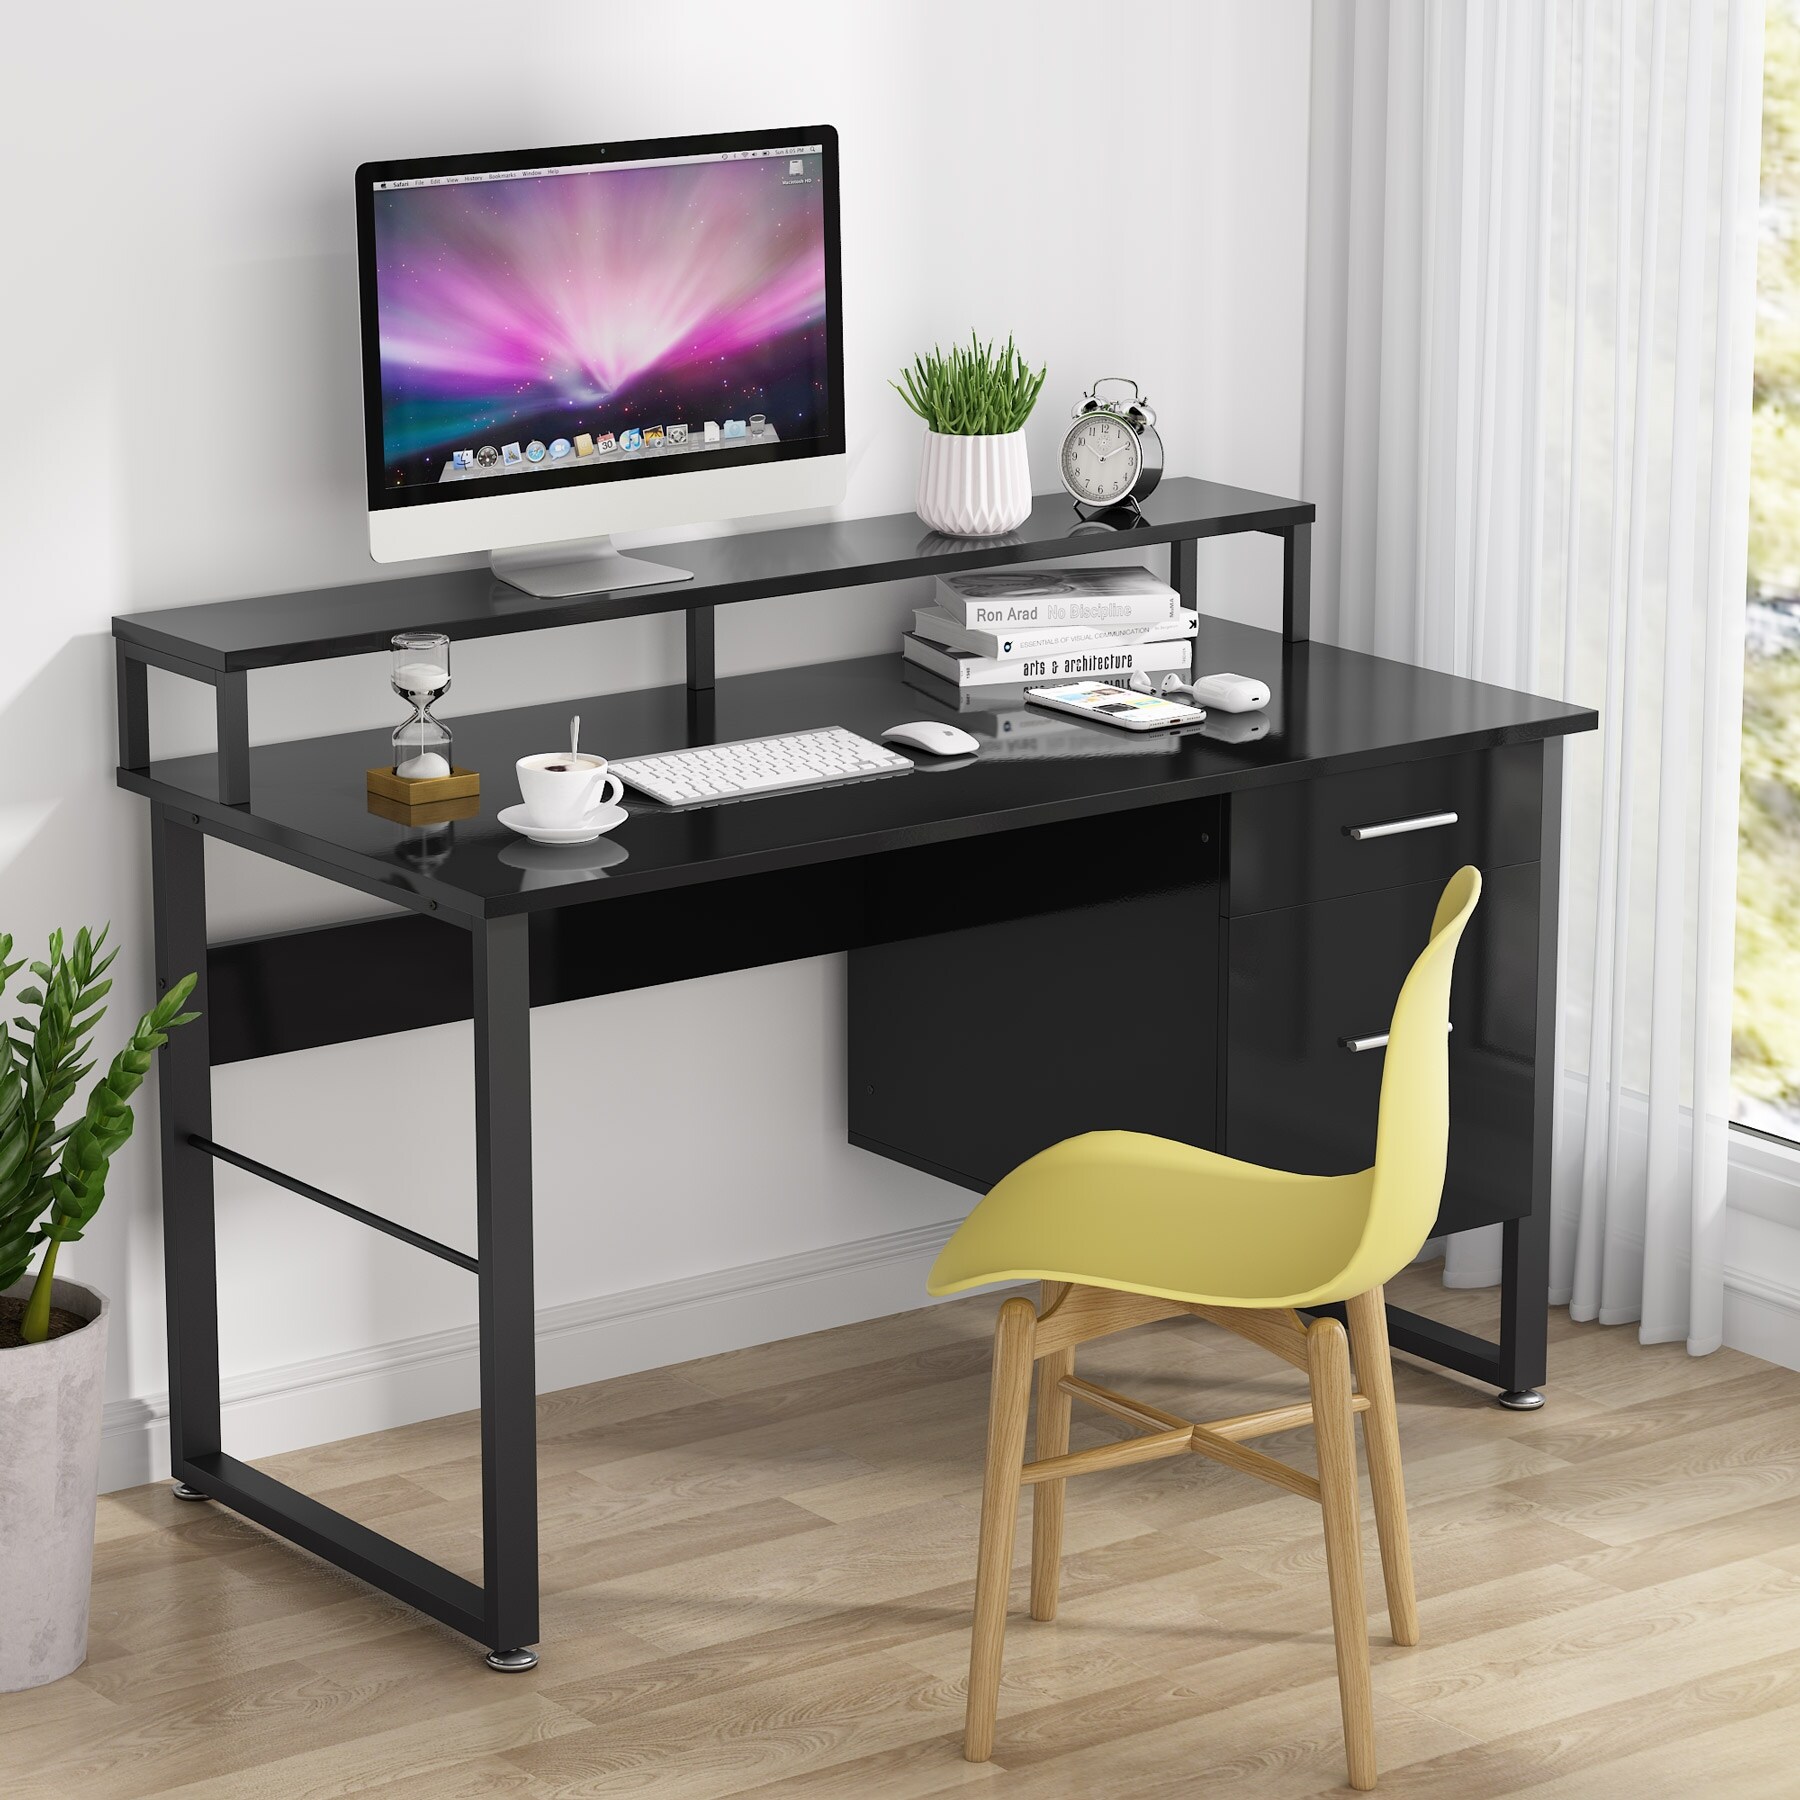 https://ak1.ostkcdn.com/images/products/is/images/direct/32429e40b6f2c8ebb7425822cb69942660dd56d7/47%22-Computer-Desk-with-Hutch%2C-2-Drawers%2C-Home-Office-Study-Table-Workstation.jpg